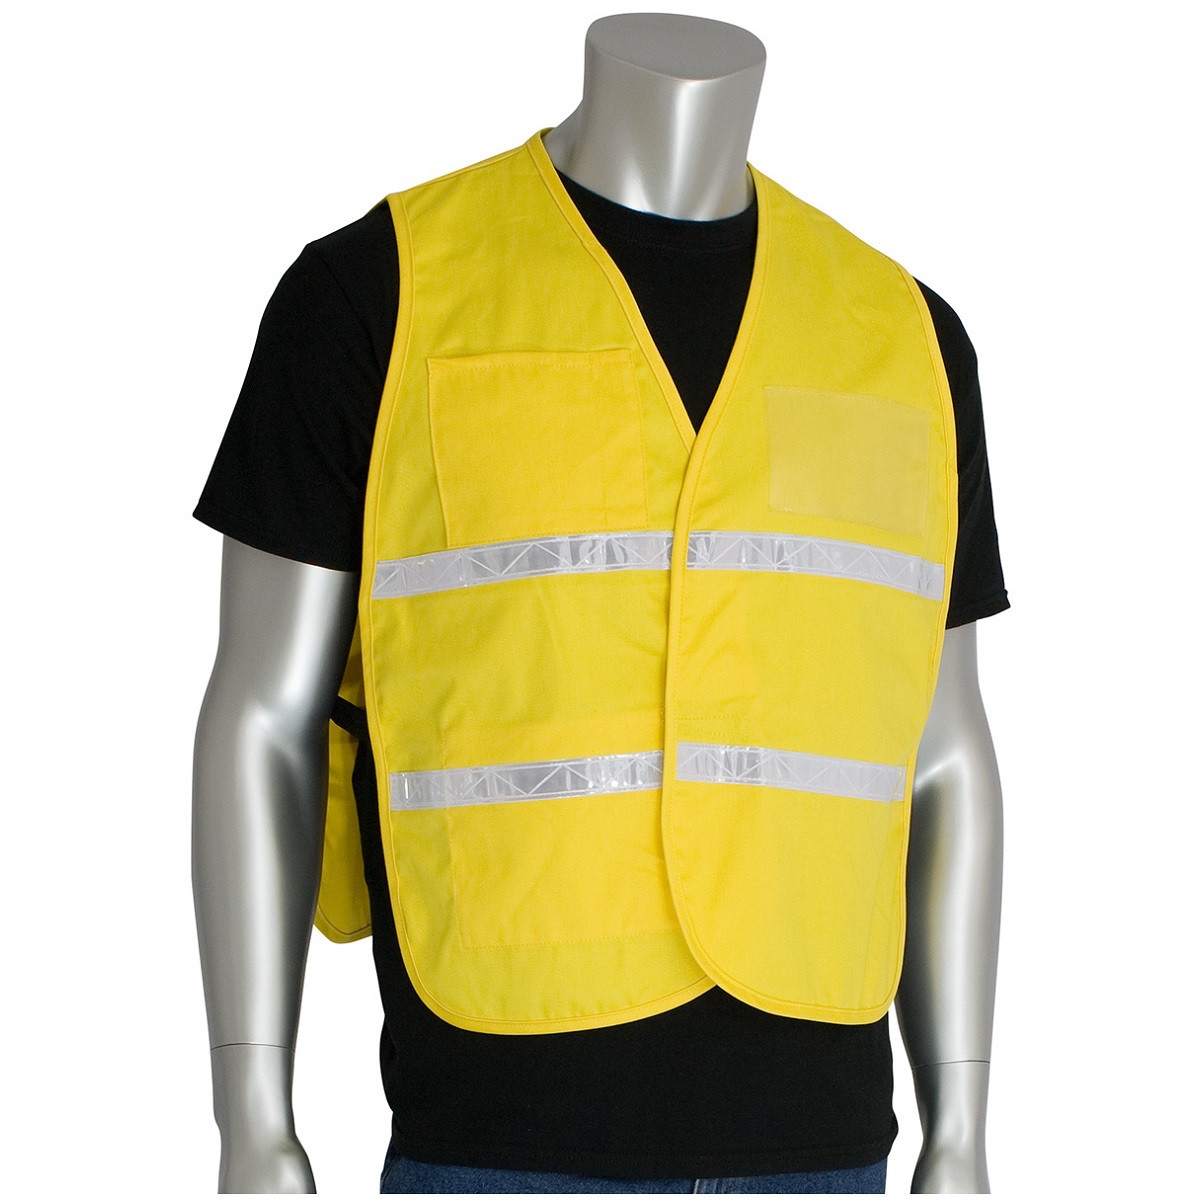 Green MCR Safety ICV208 Incident Command Polyester/Cotton Safety Vest with 1-Inch White Reflective Stripe 